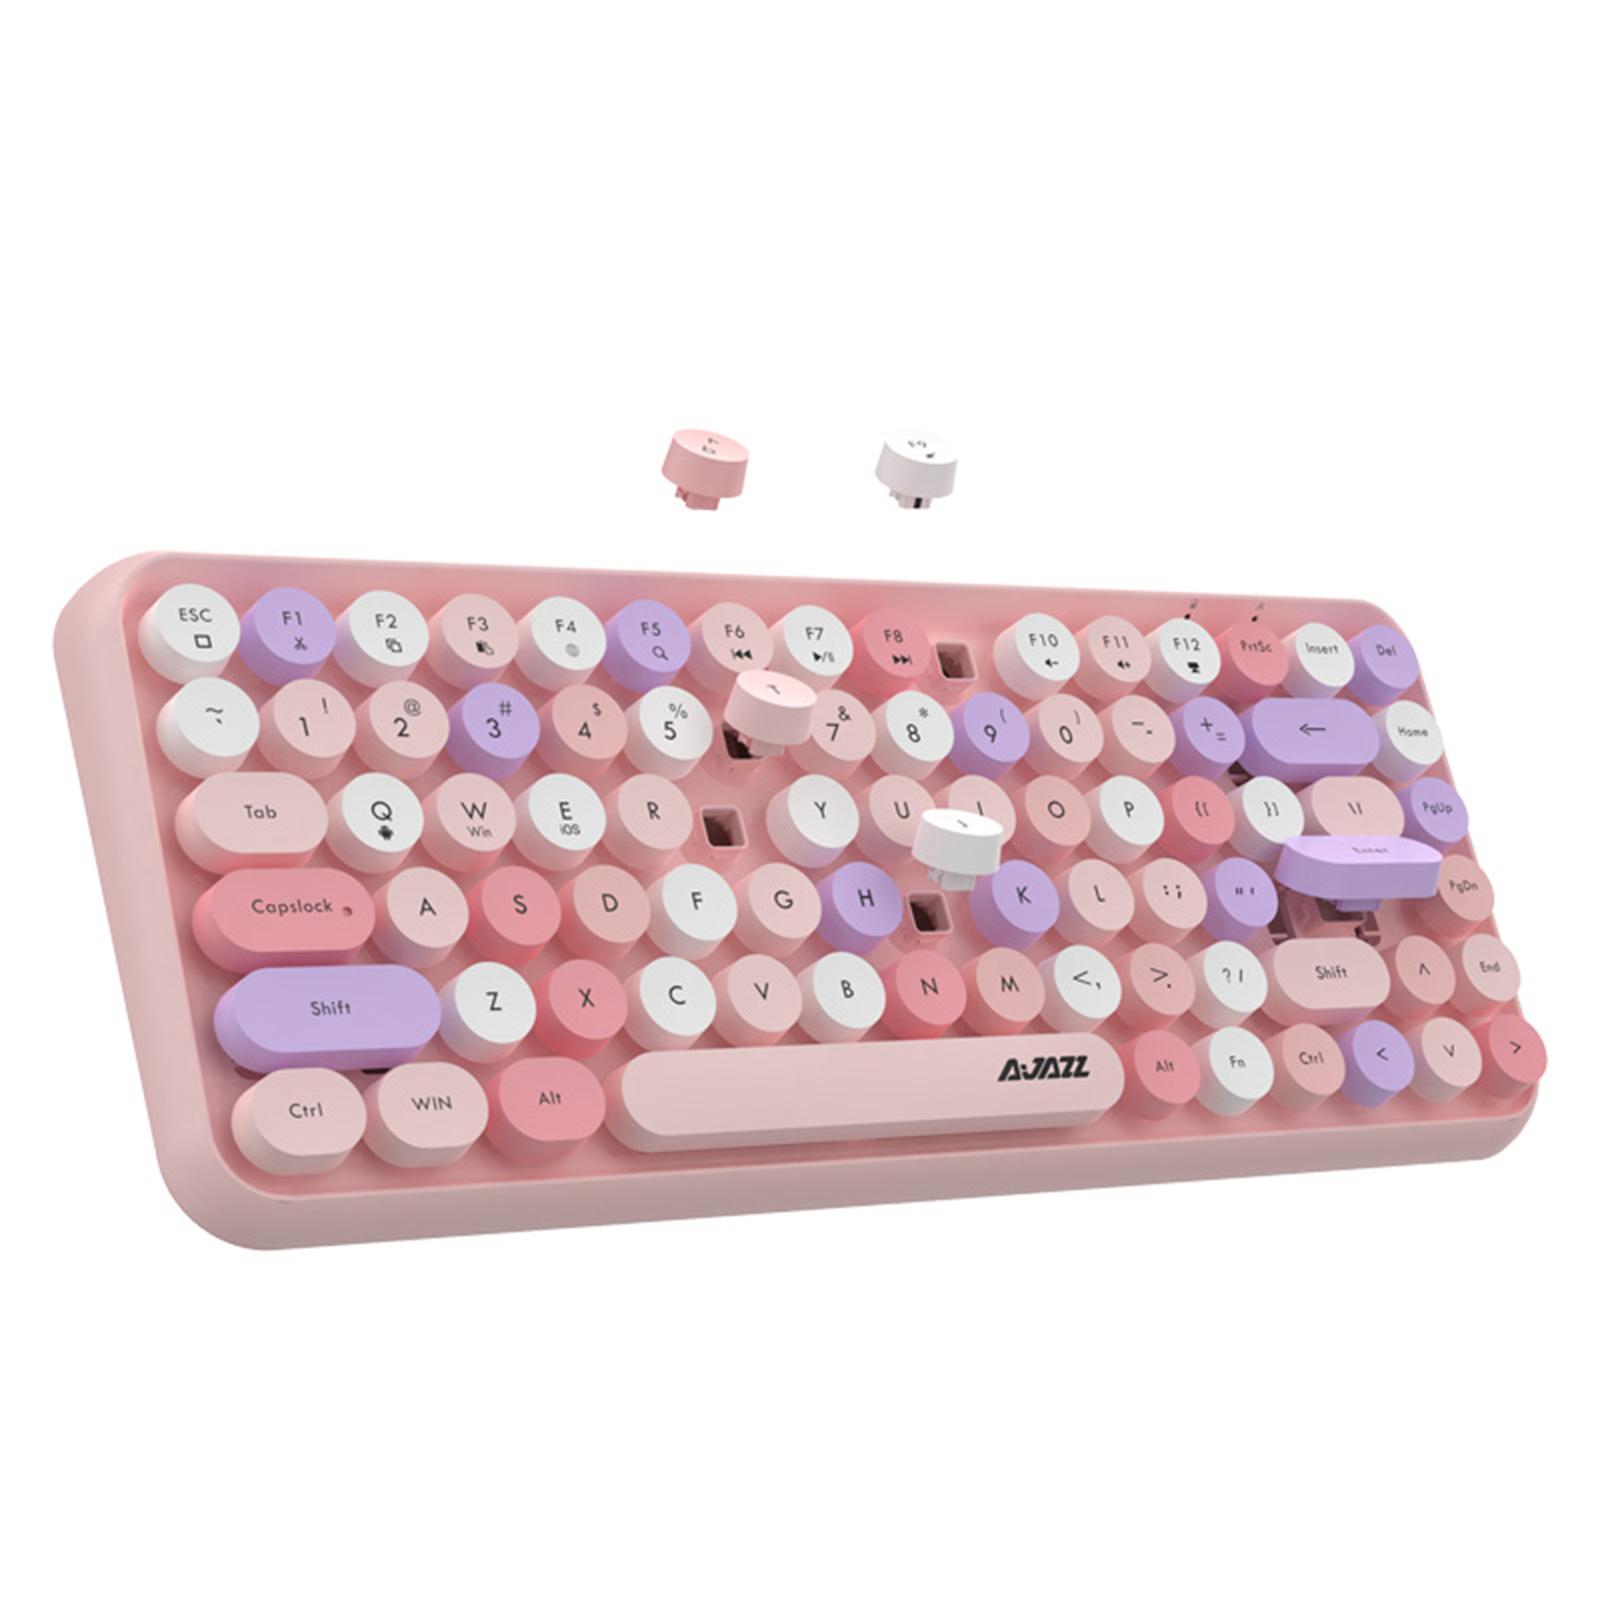 Wireless Bluetooth Keyboard Mini Portable 84-Key Keyboard for PC, Tablet, Multi-Device, Home and Office Use